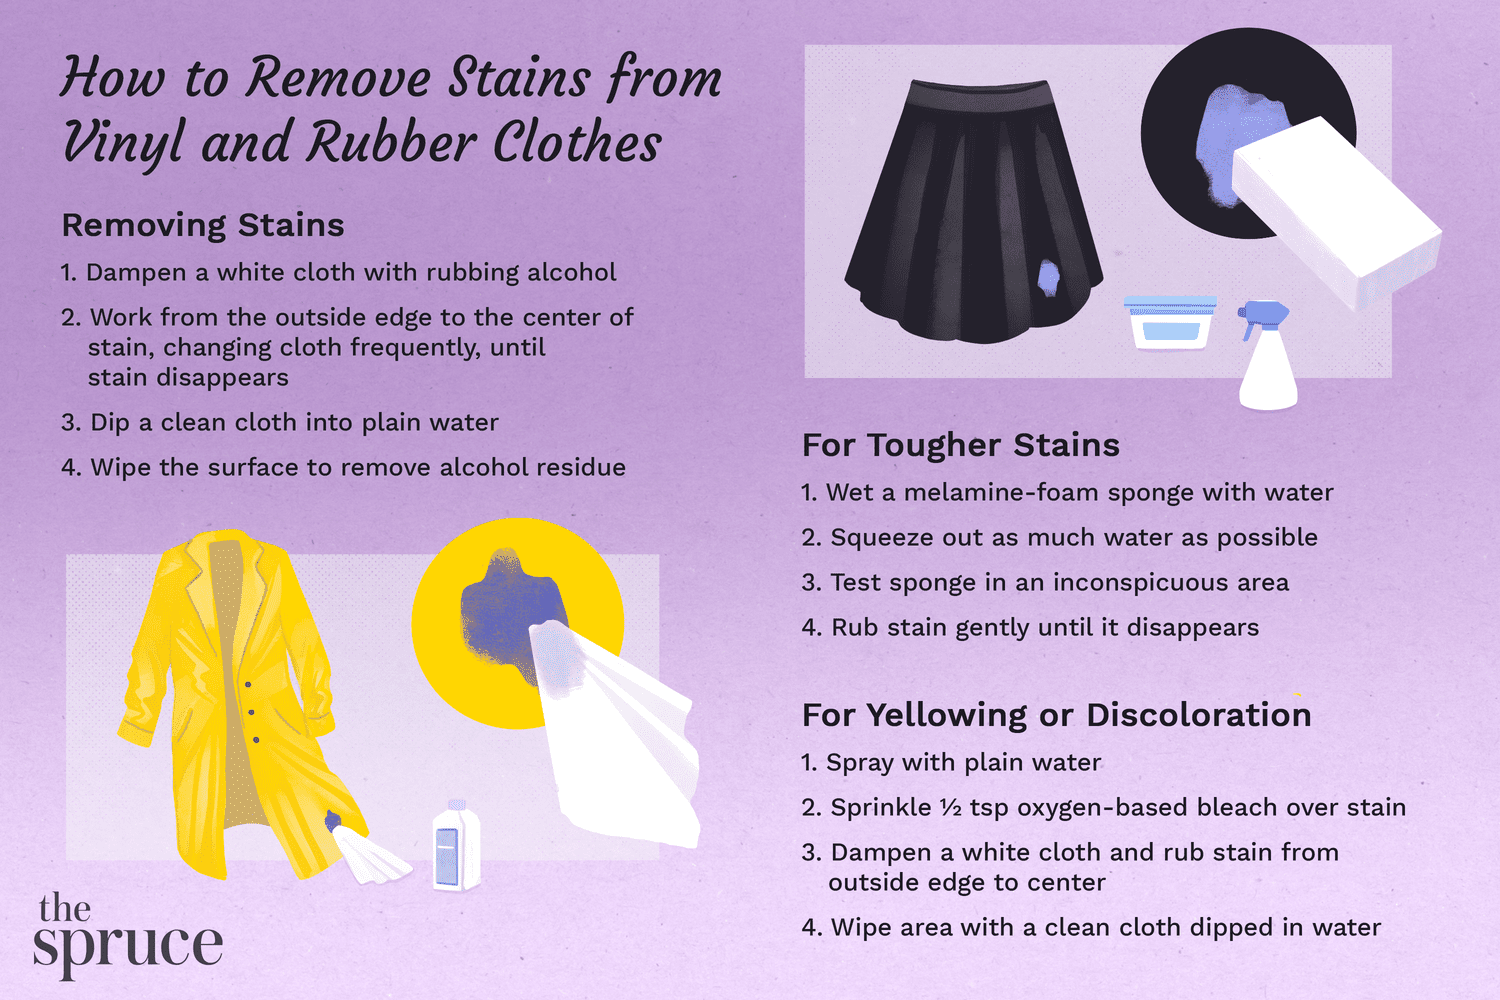 How to Get Rubber Stains Out of Clothes